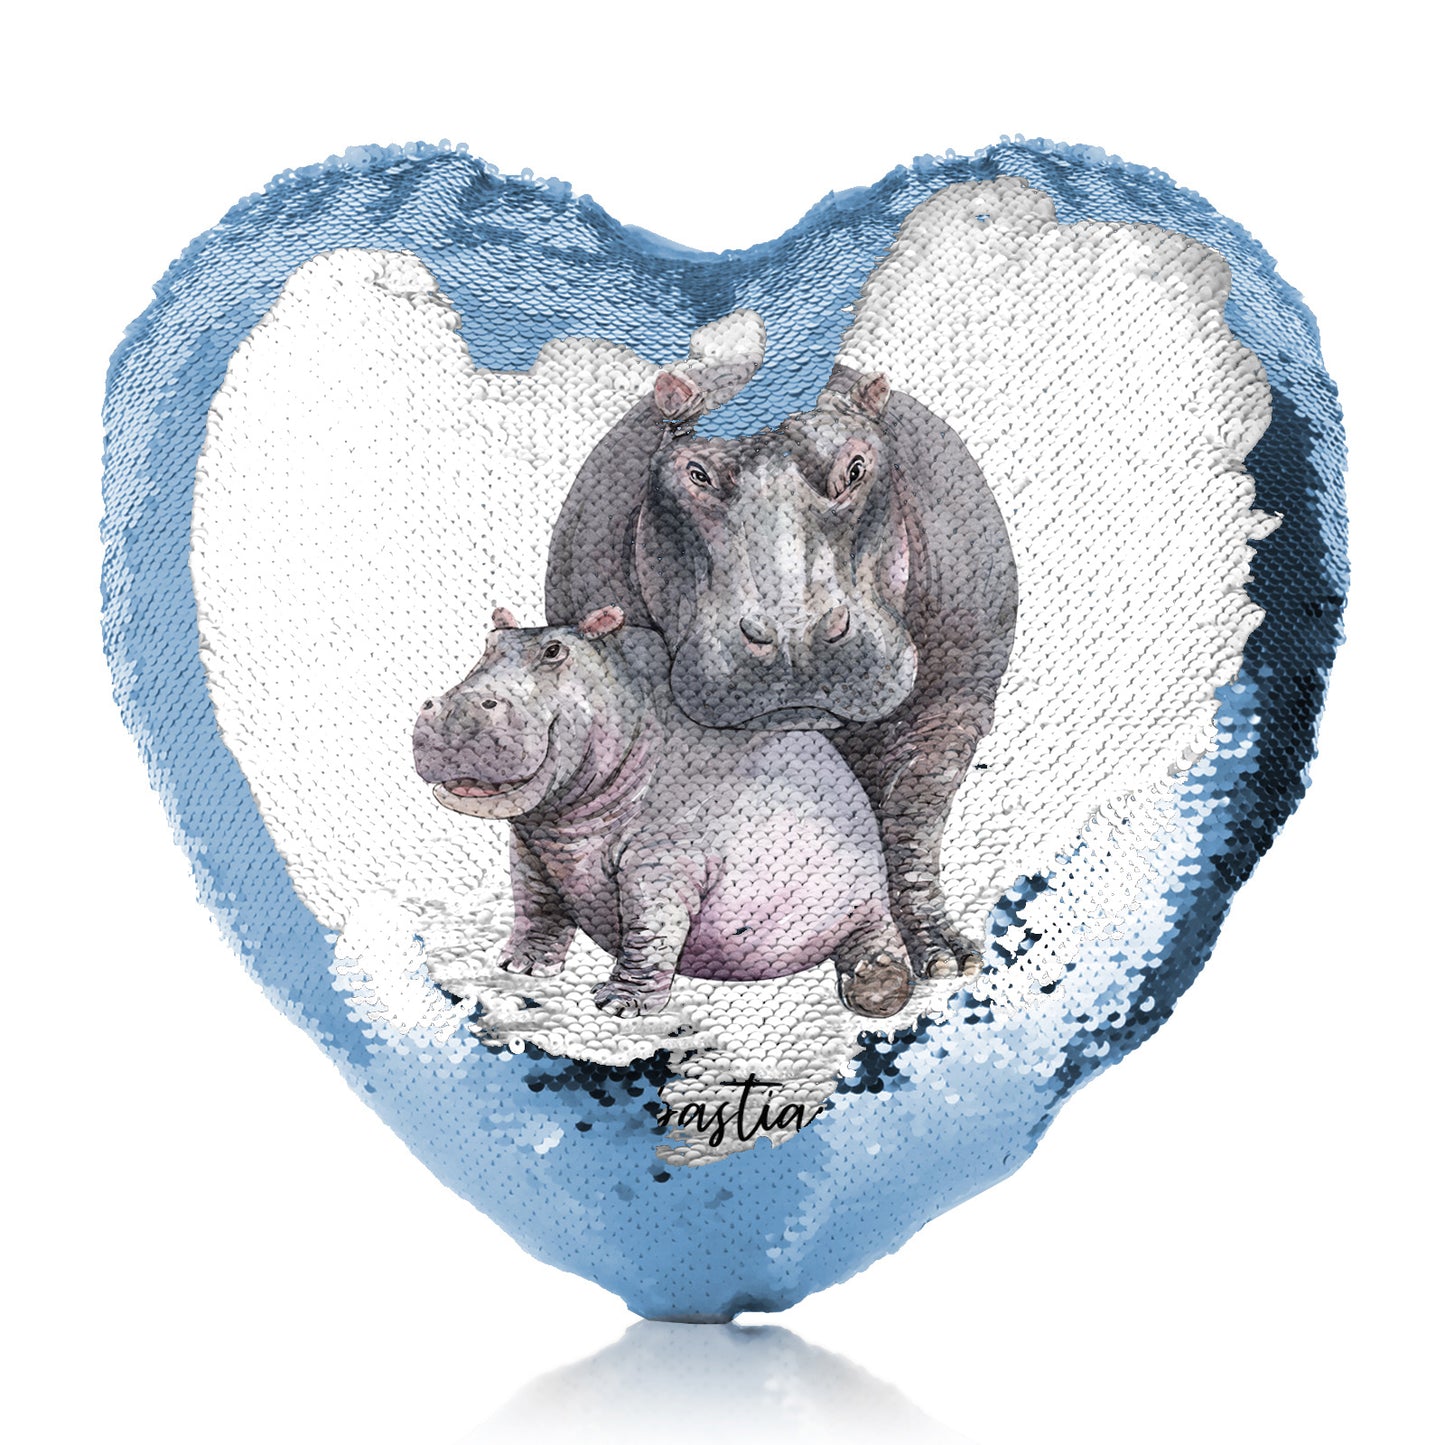 Personalised Sequin Heart Cushion with Welcoming Text and Embracing Mum and Baby Hippos